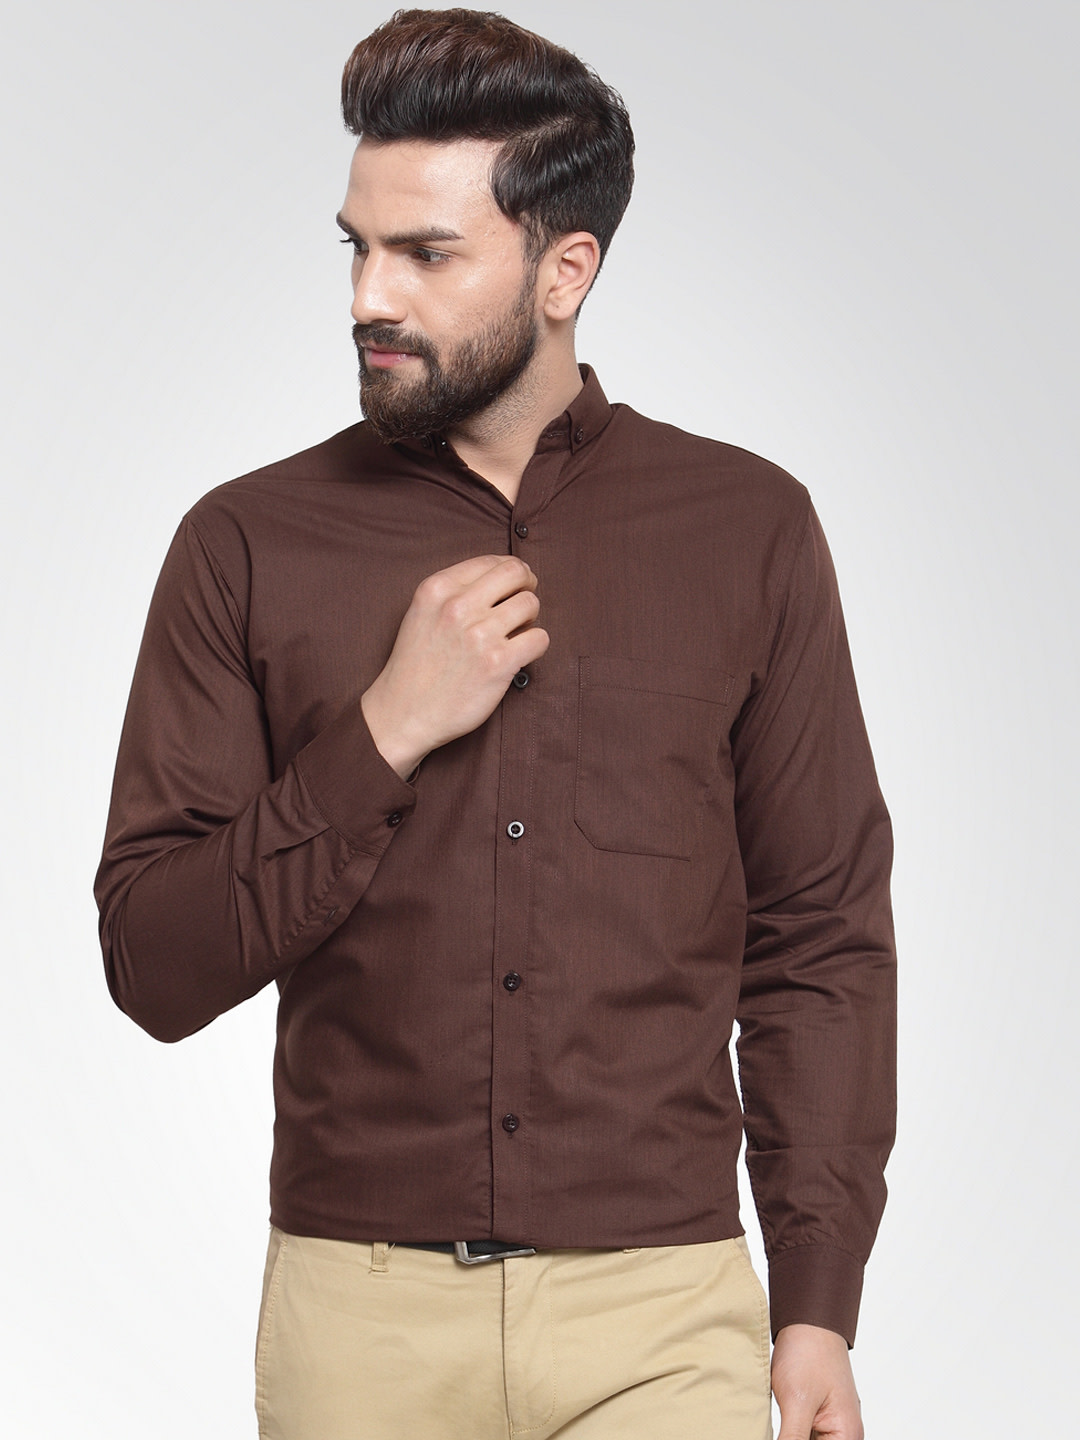 Buy > coffee brown color shirt> in stock OFF-62%